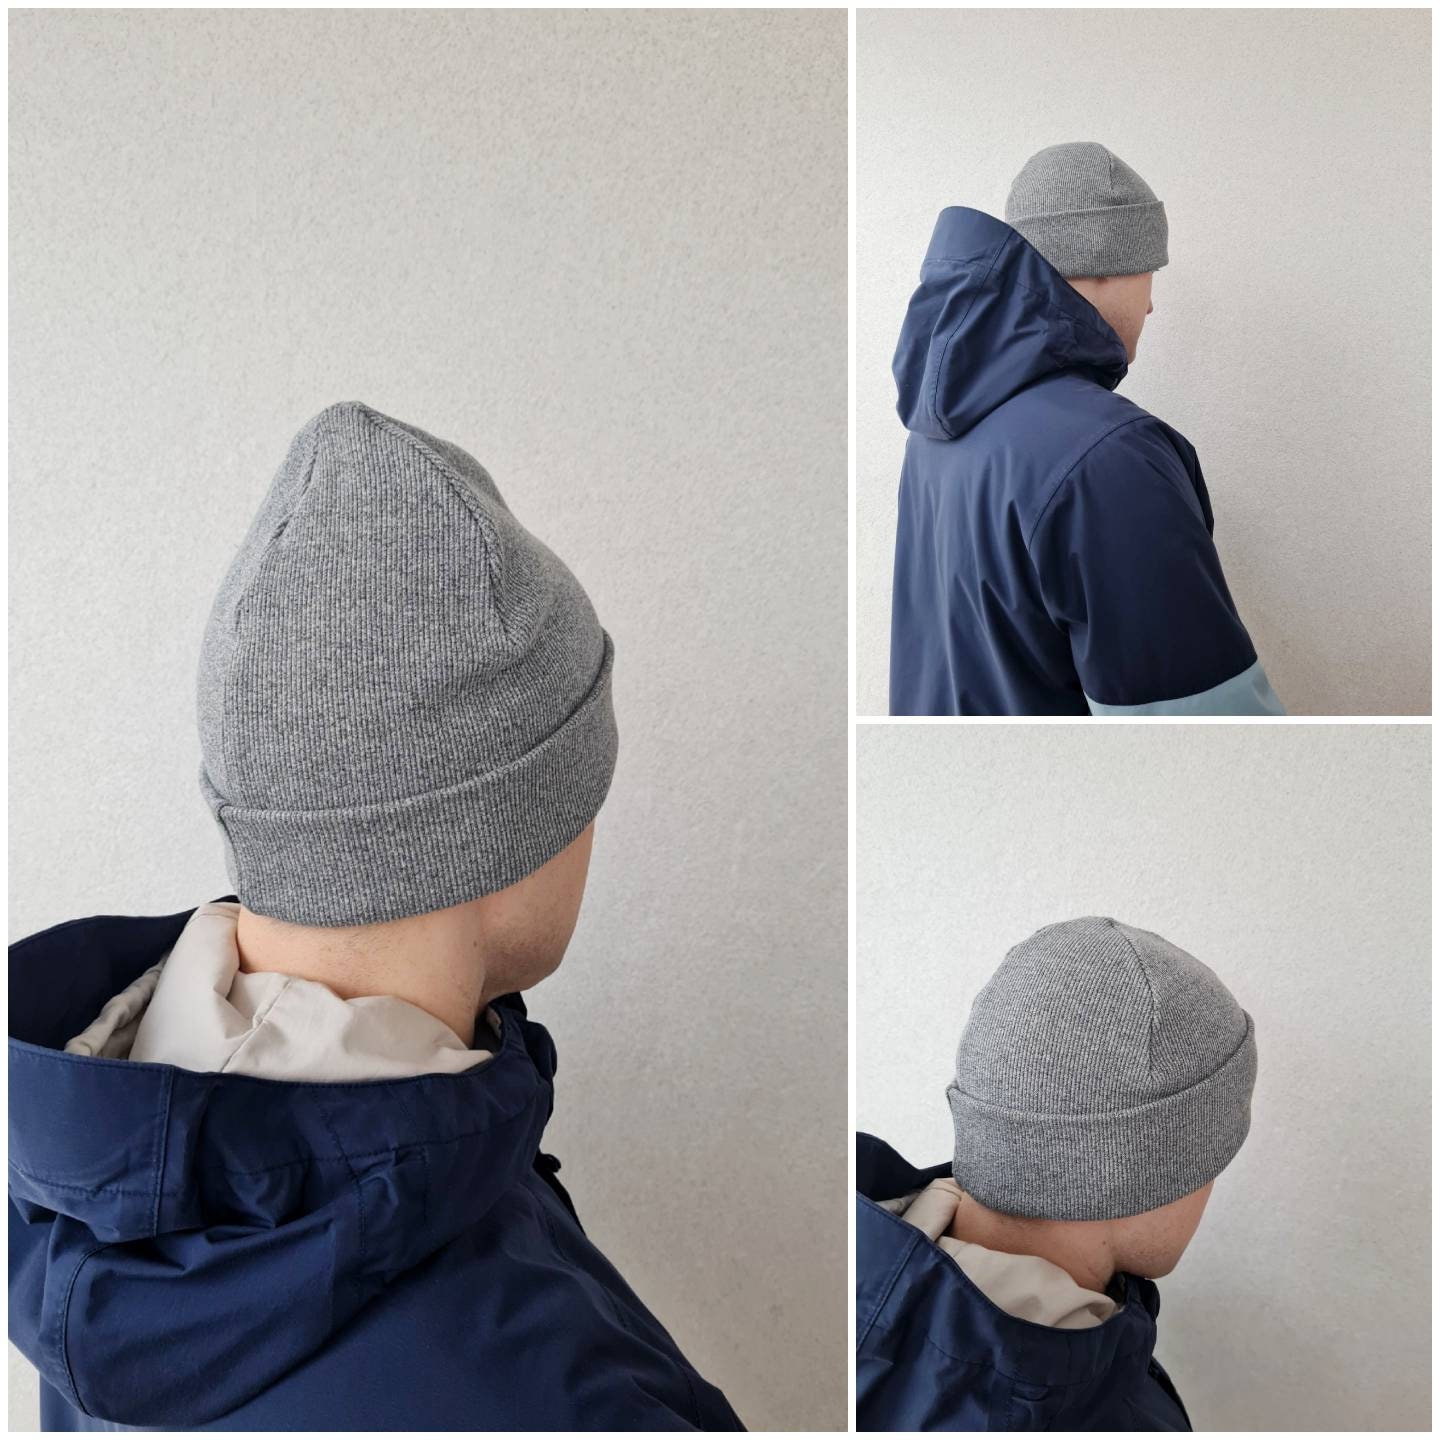 Beanie Hat Sewing Video Tutorial Beanie Hat Sewing Pattern | Etsy